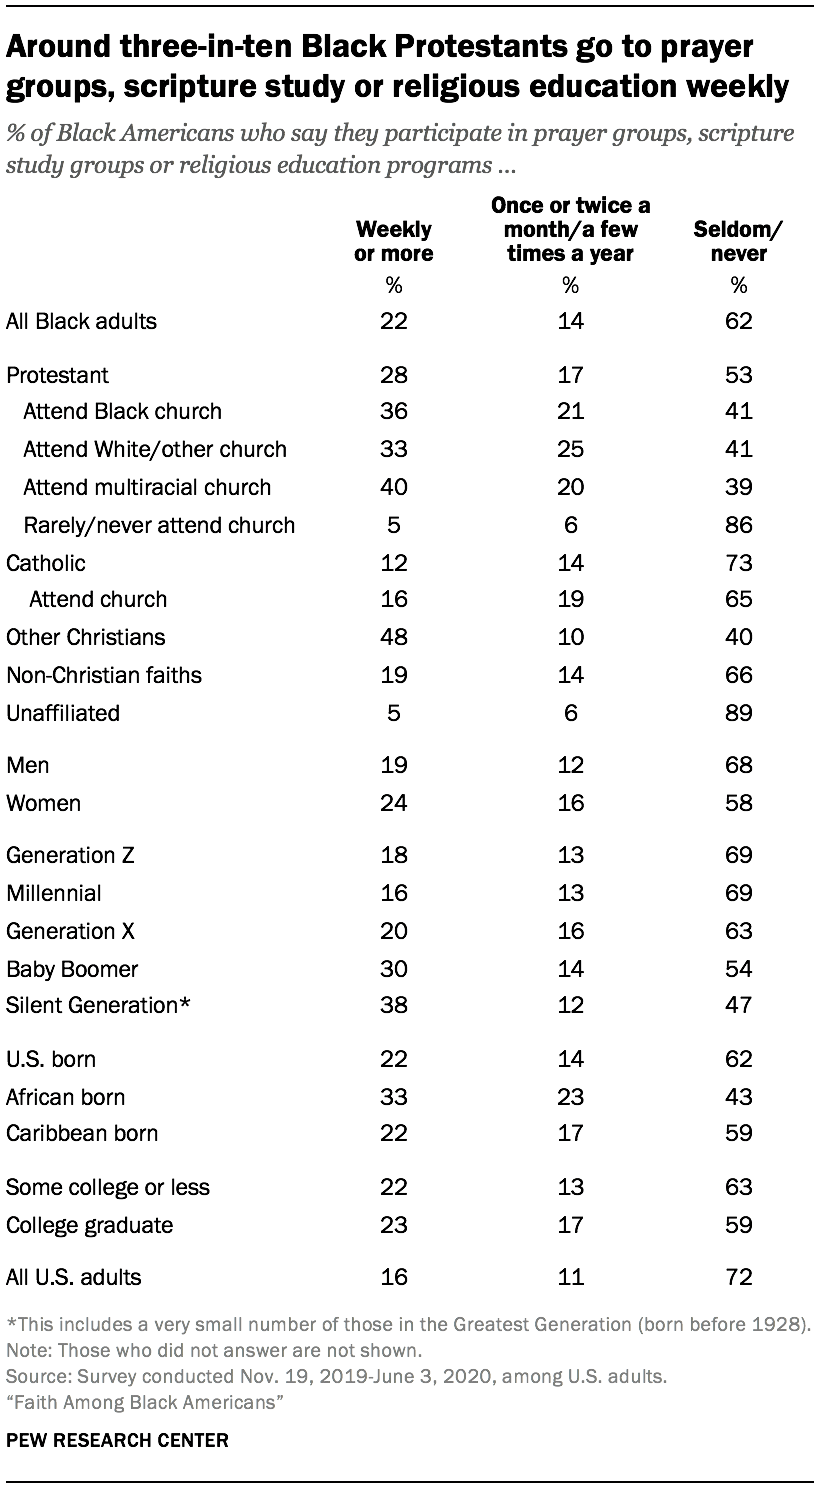 Around three-in-ten Black Protestants go to prayer groups, scripture study or religious education weekly